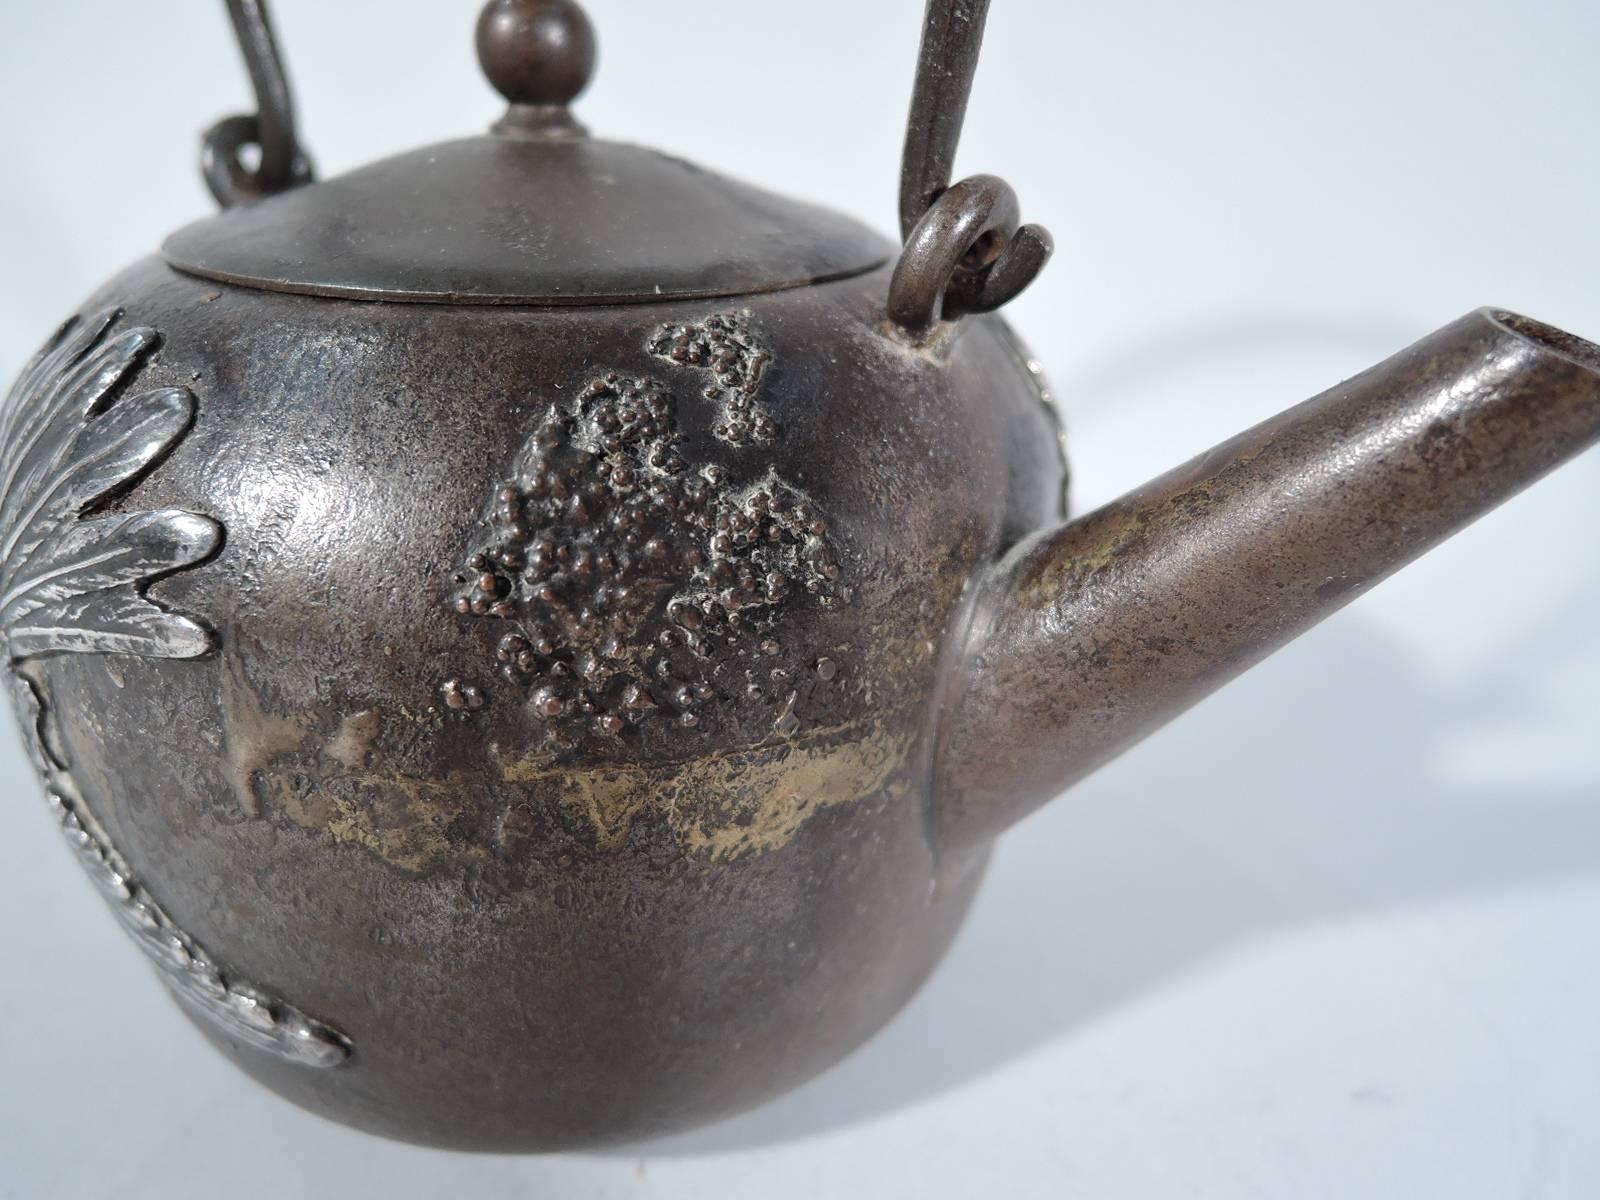 American Rare Japonesque Mixed Metal Iron and Sterling Silver Teapot by Gorham